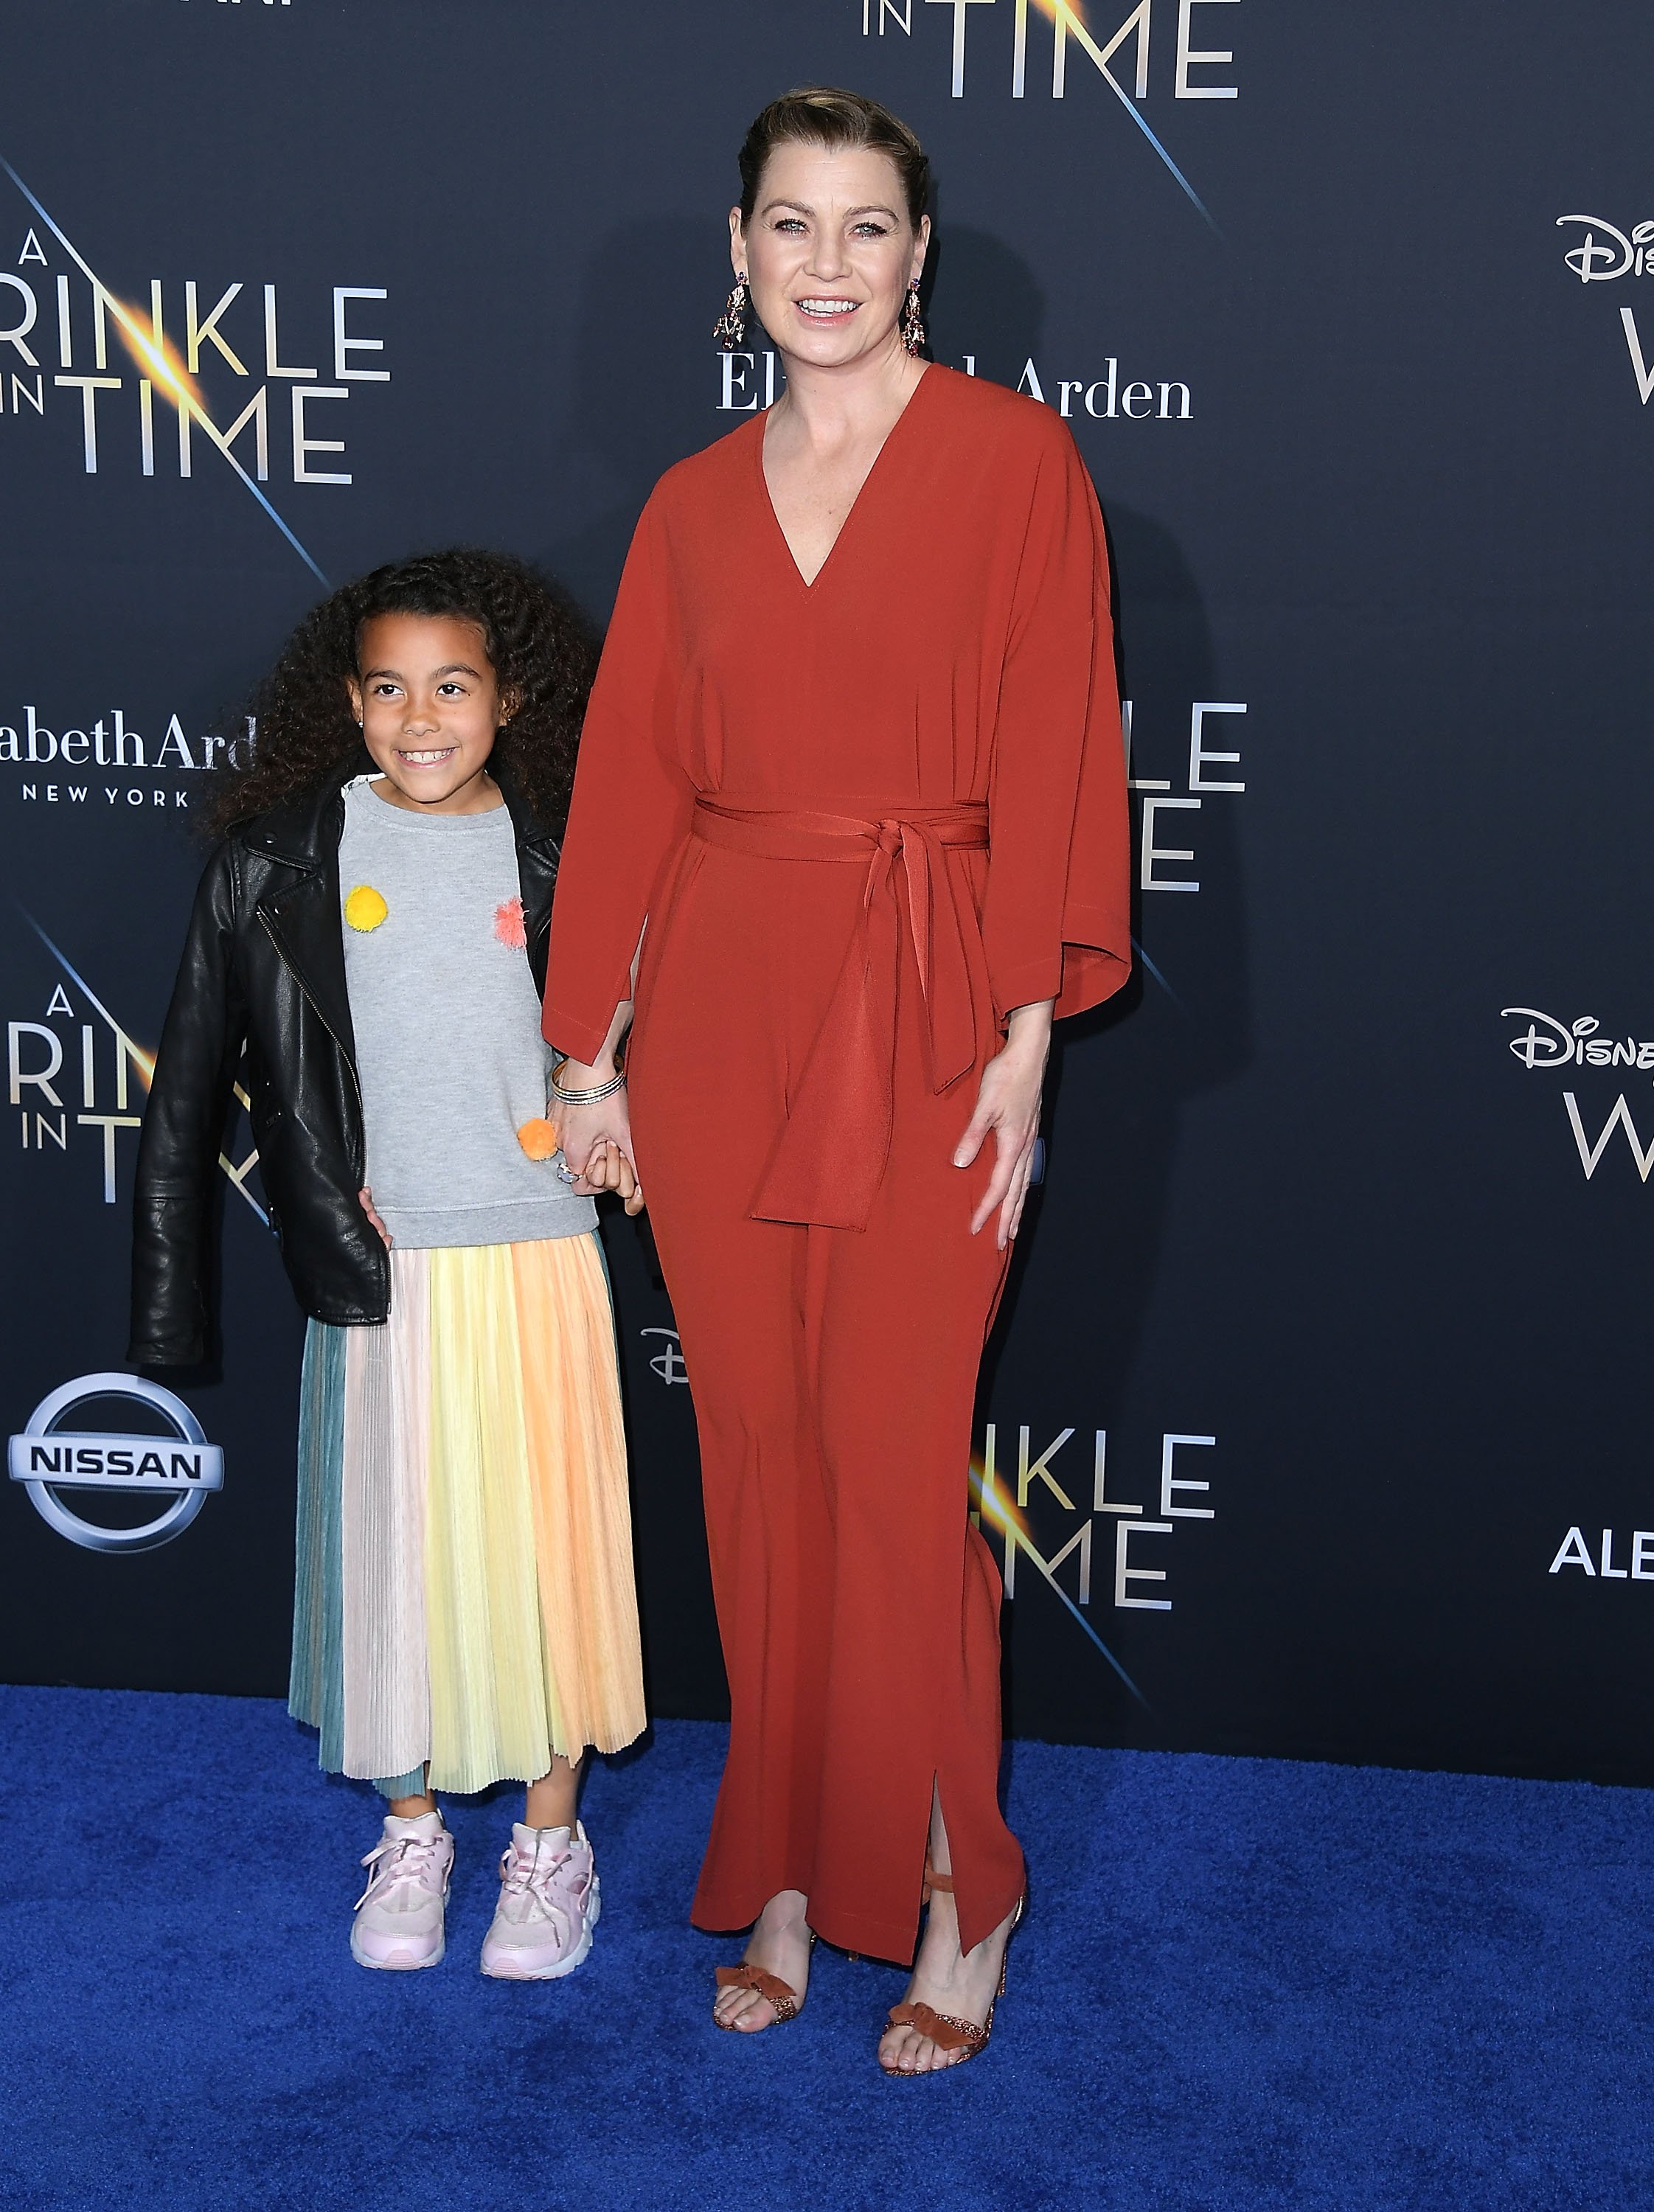 Ellen Pompeo and Stella Ivery at the Premiere Of Disney's "A Wrinkle In Time" on February 26, 2018, in Los Angeles, California. | Source: Getty Images